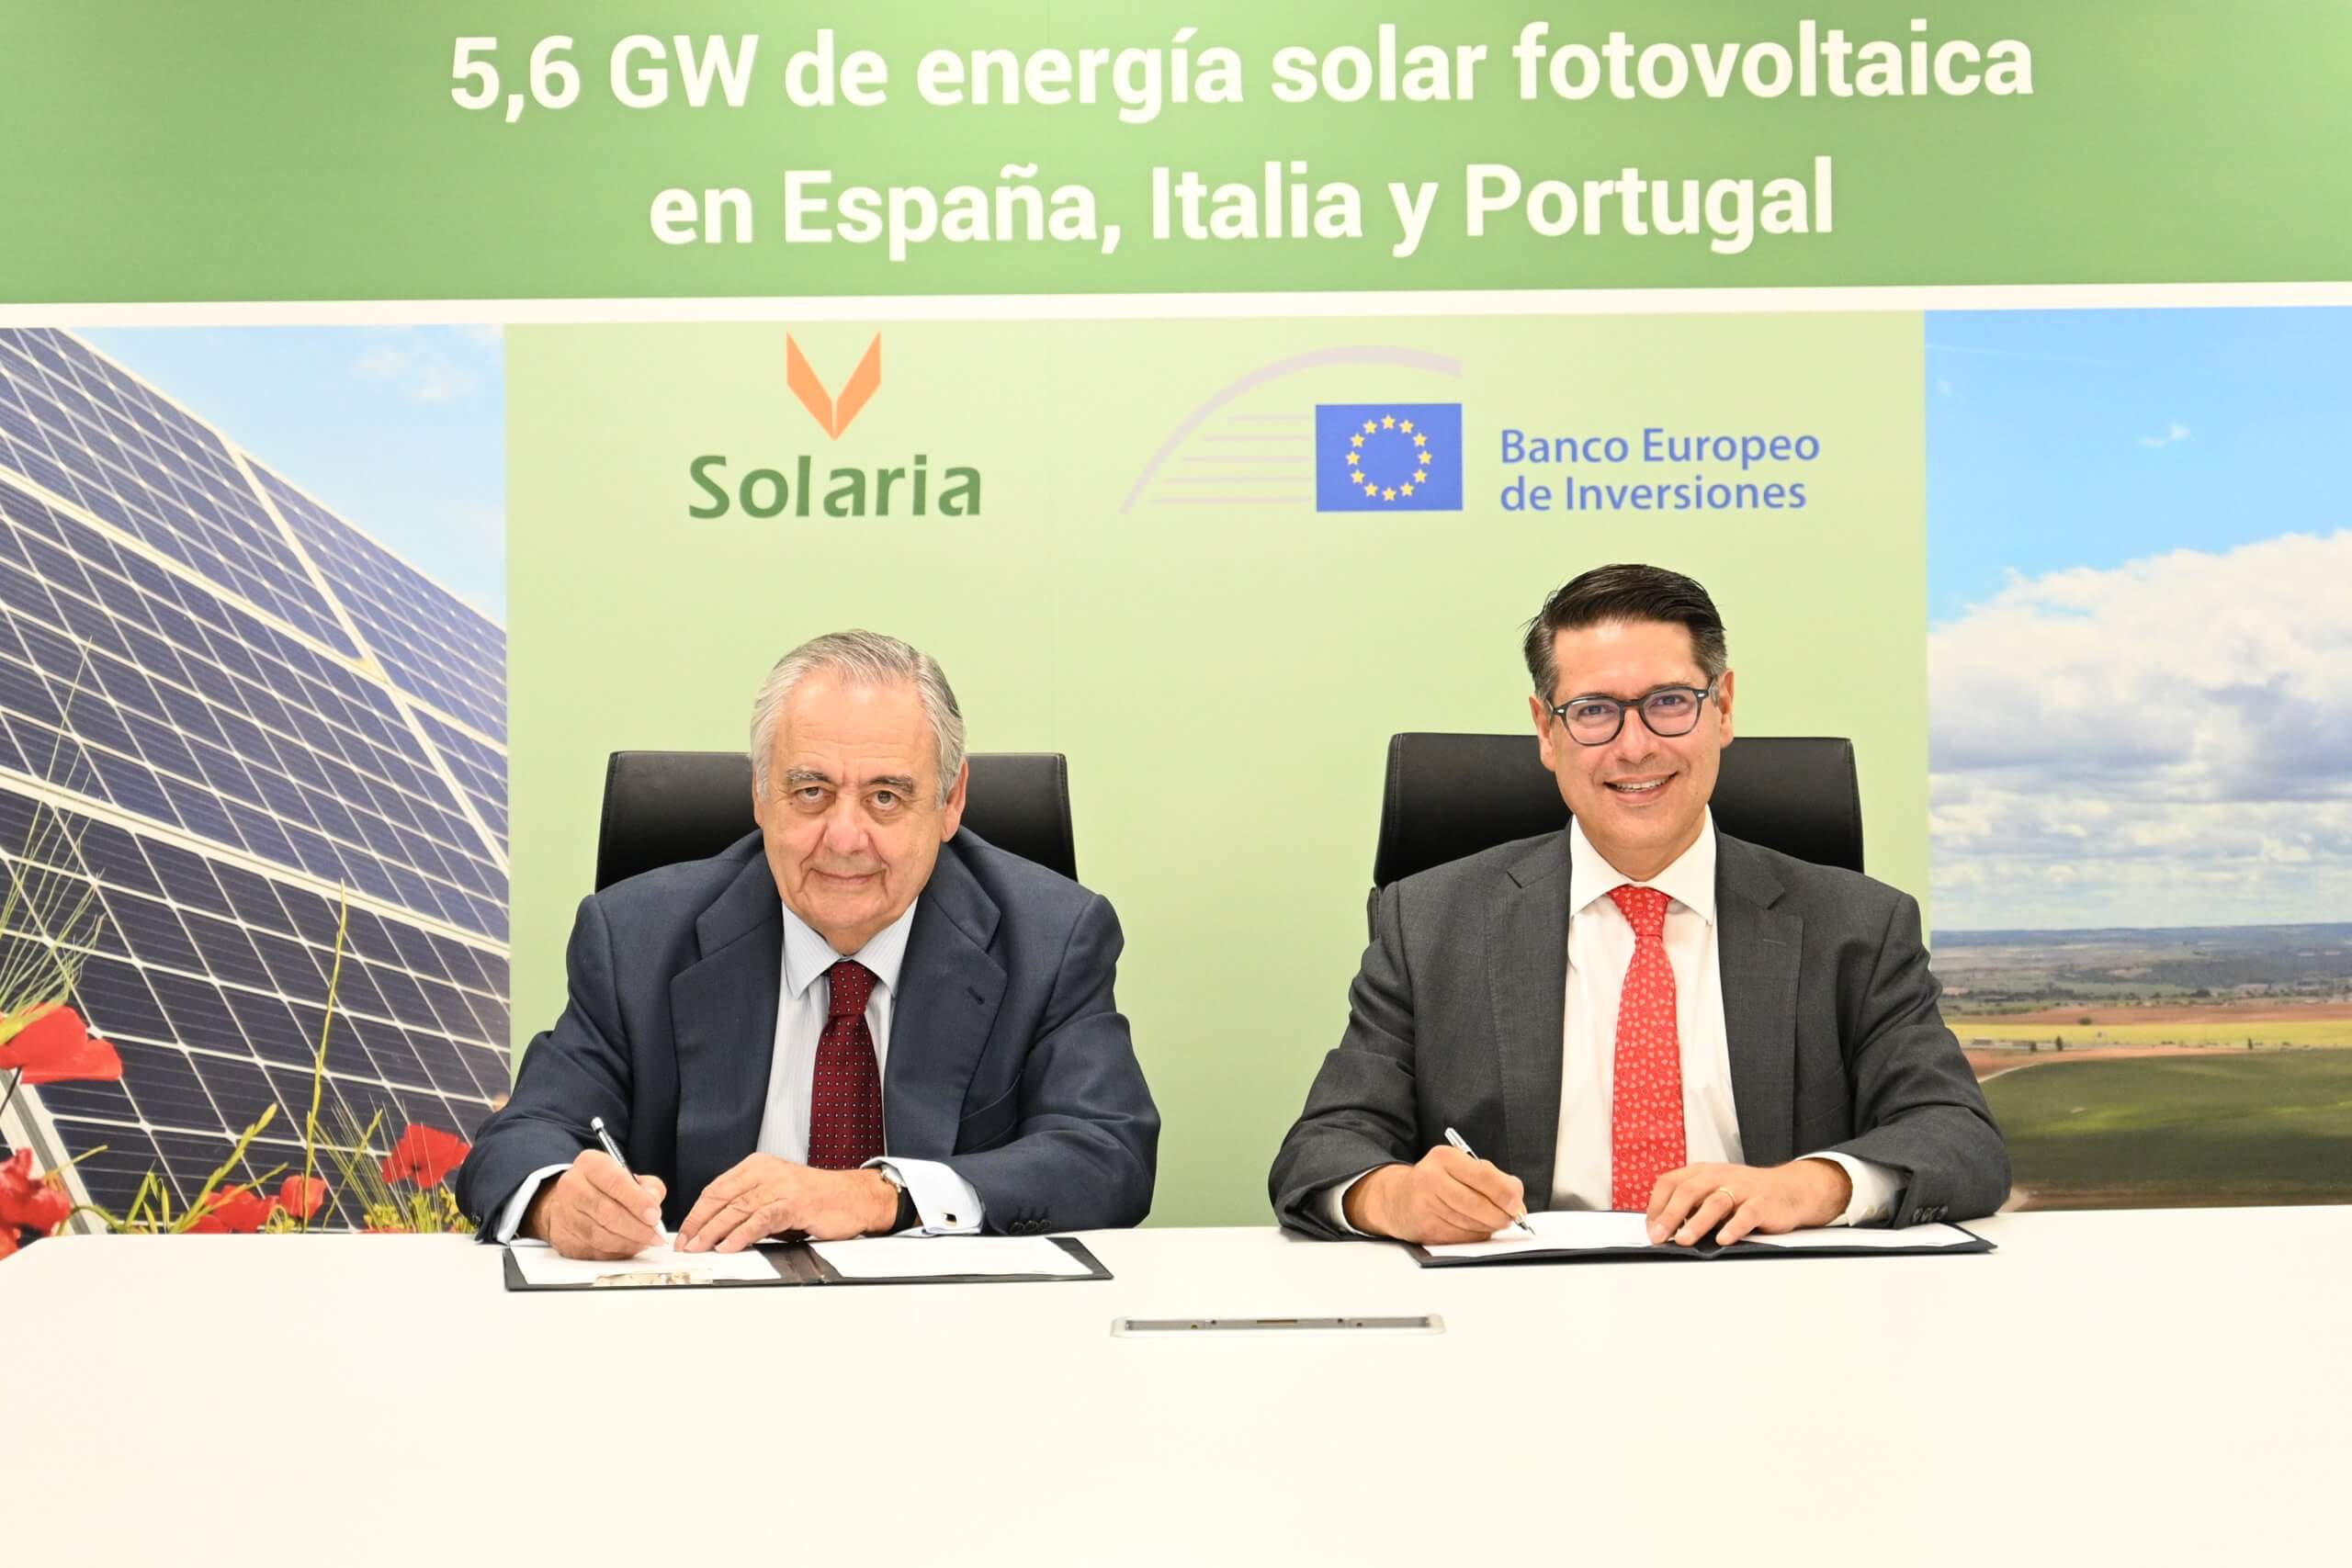 EIB approves framework financing of up to €1.7 billion for Solaria’s renewable energy rollout in Spain, Italy and Portugal